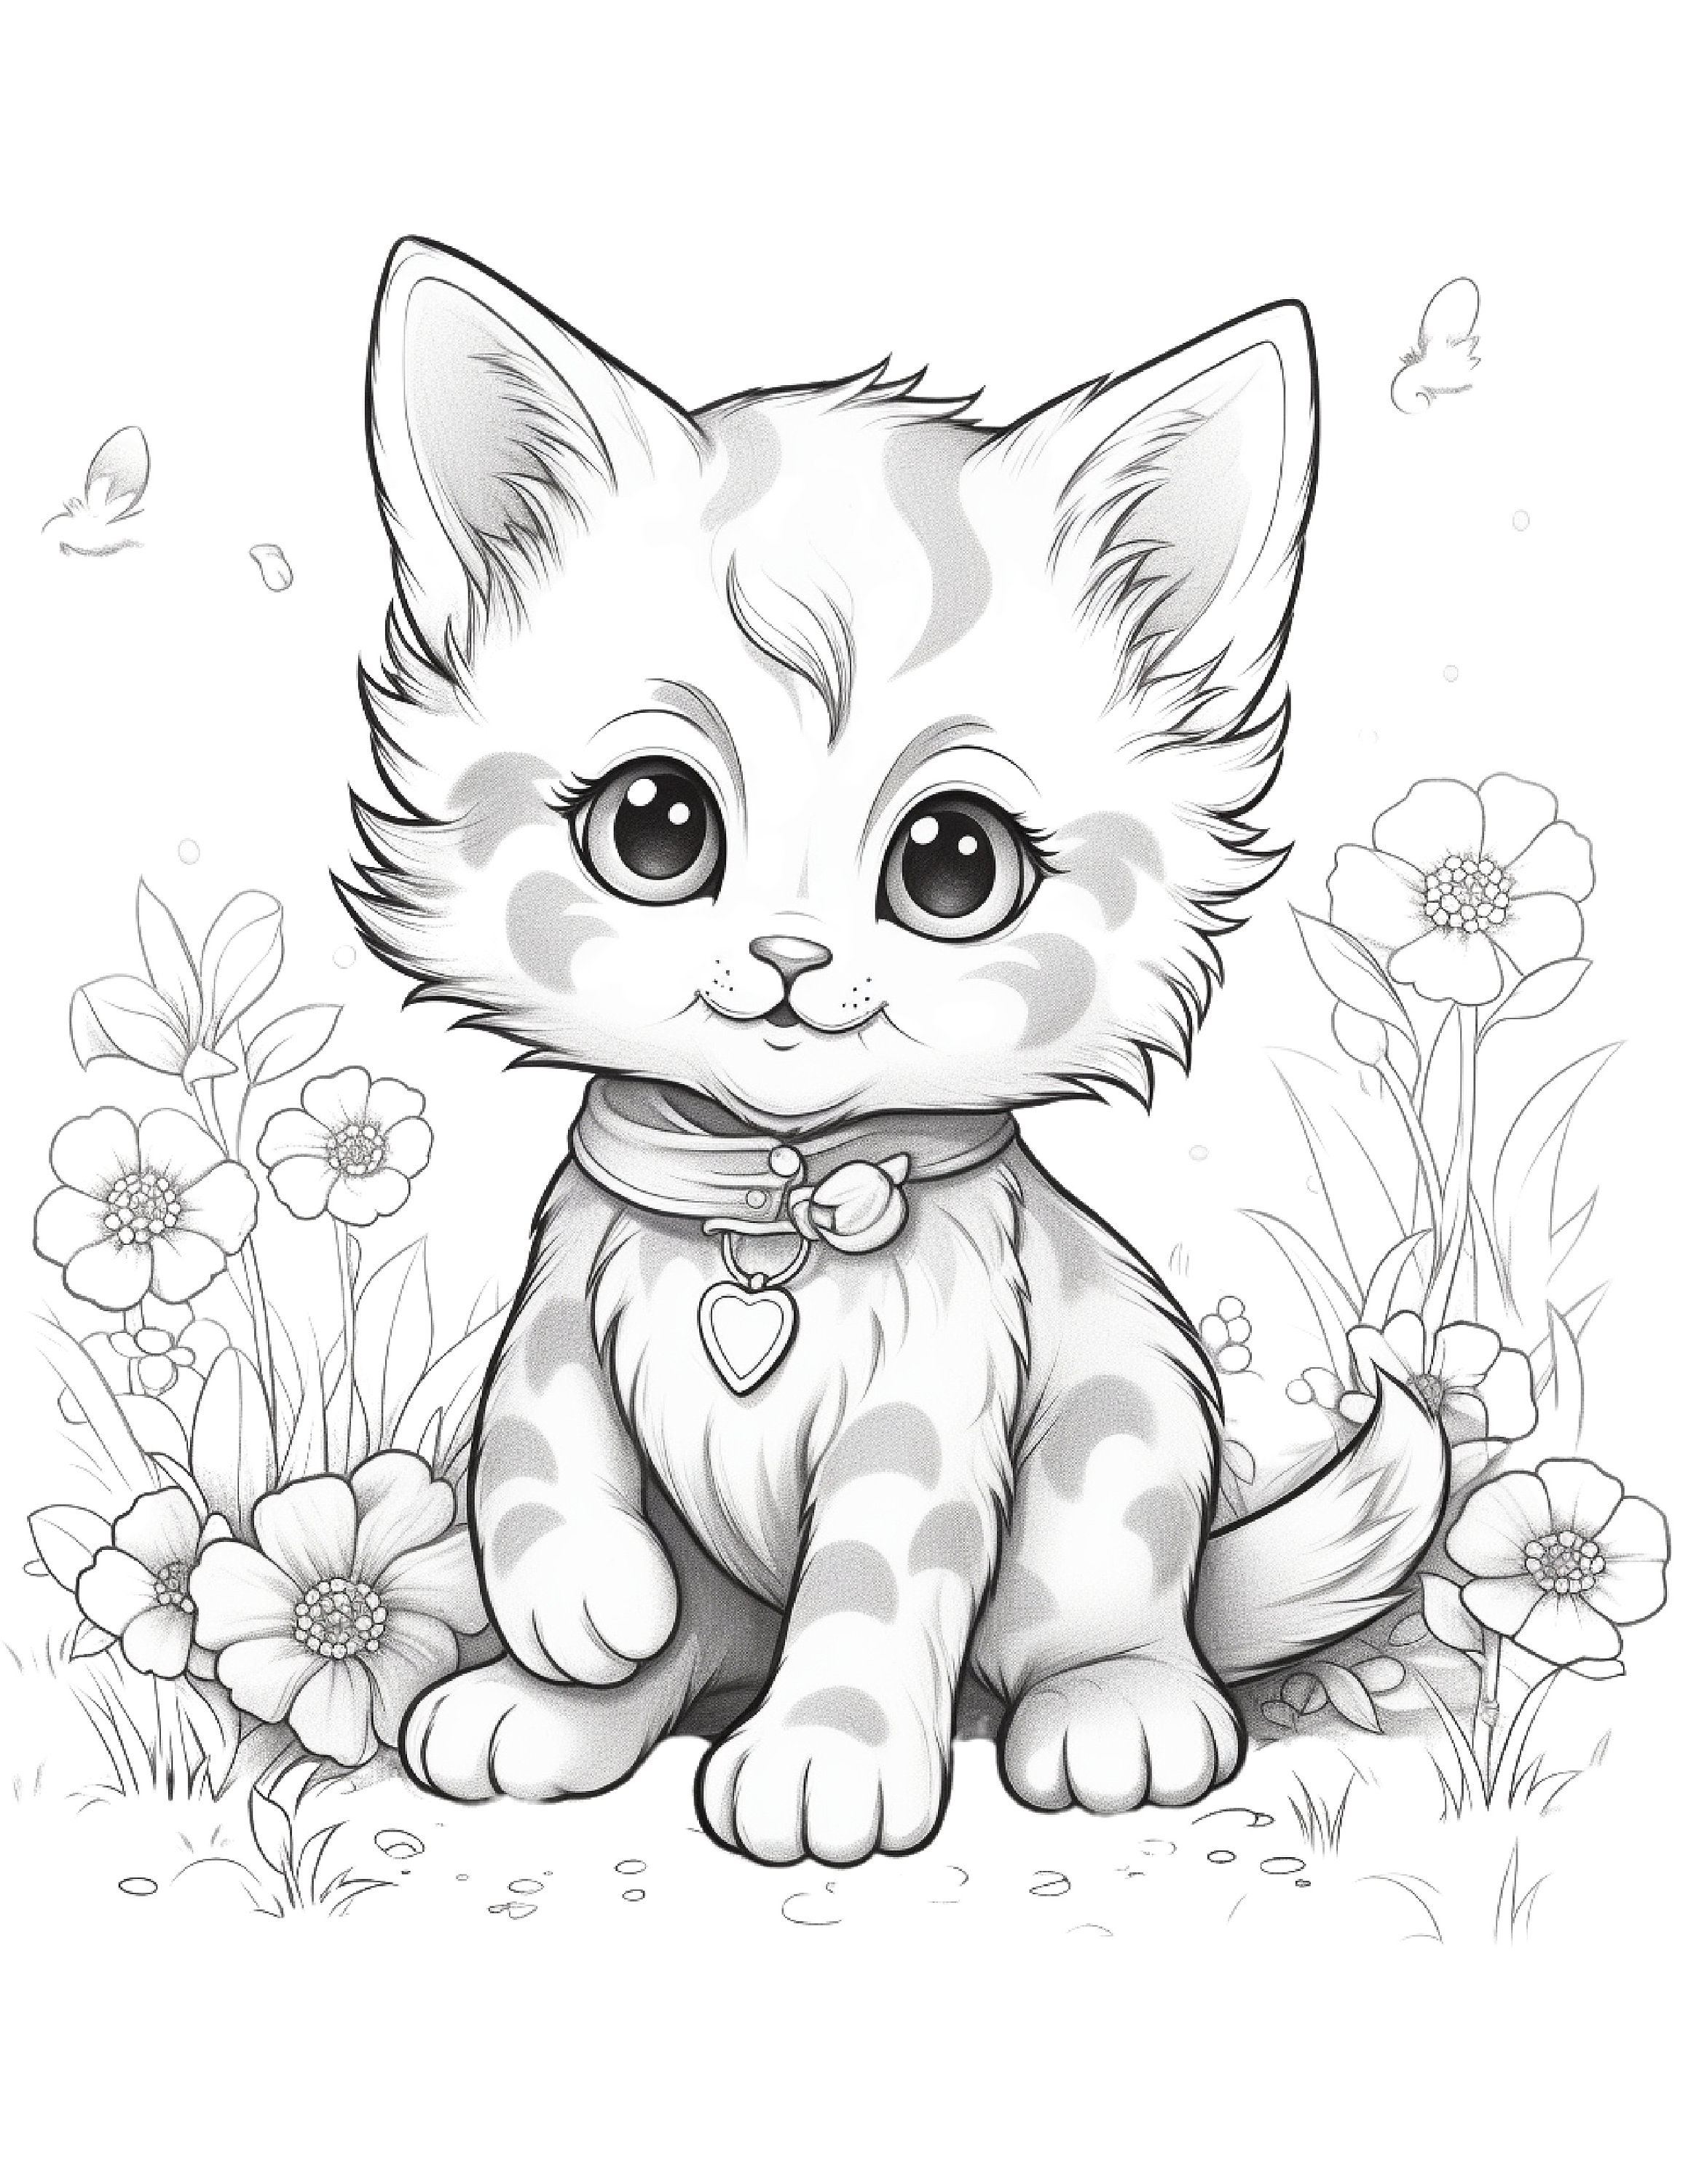 Five cute kittens coloring sheets for instant download